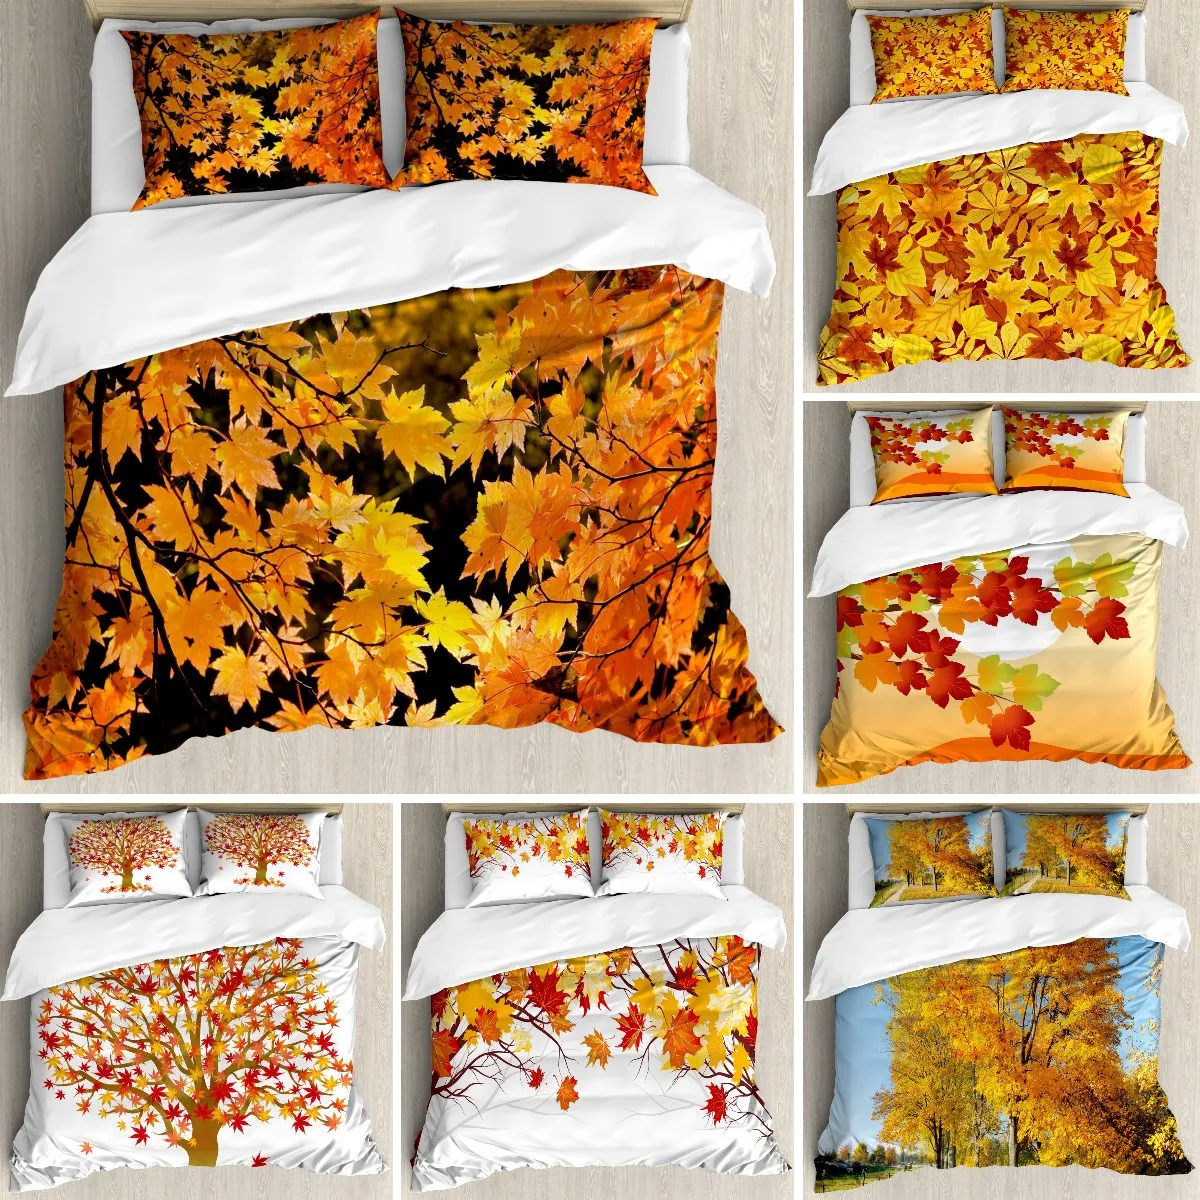 

Fall Duvet Cover Set King/Queen/Full/Twin Size, Canadian Maple Leaves In The Fall Season Theme Nature Plant Print Duvet Cover